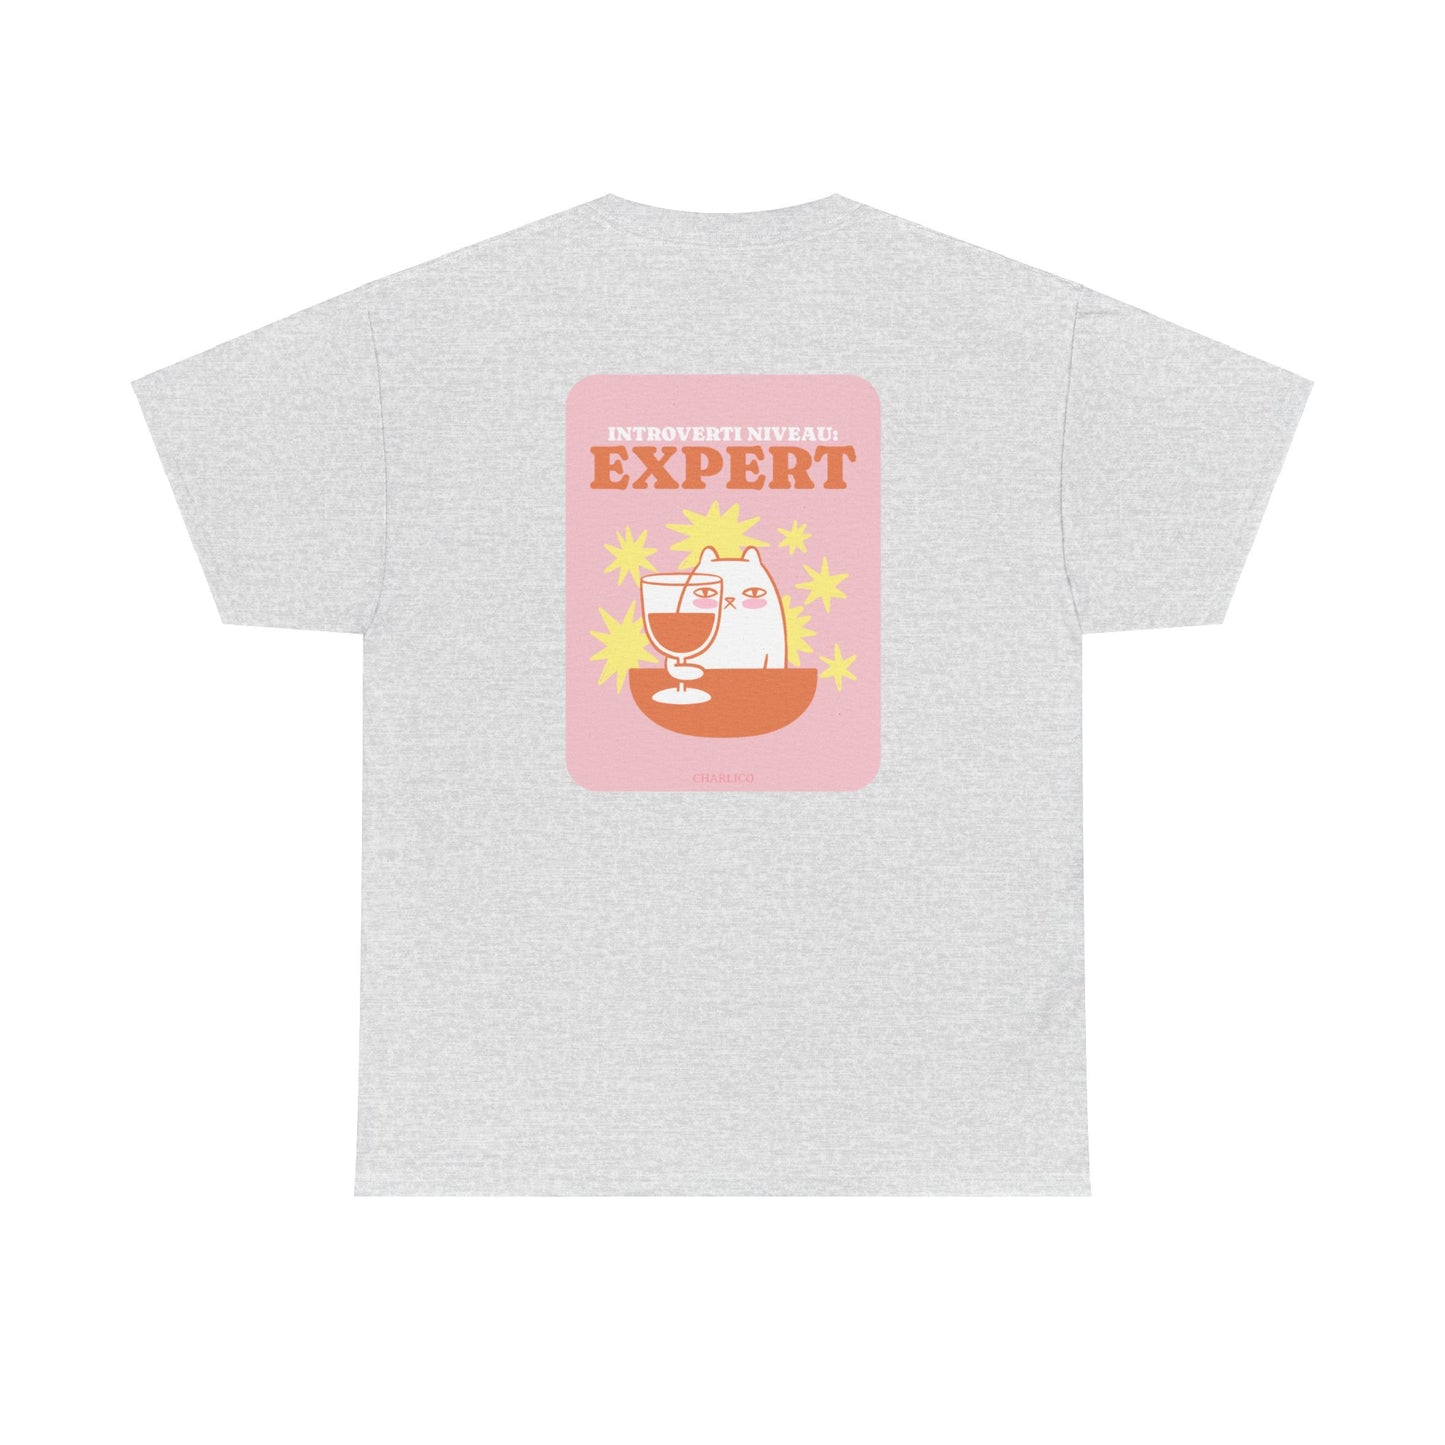 Printed t-shirt -introvert level: EXPERT- for adults